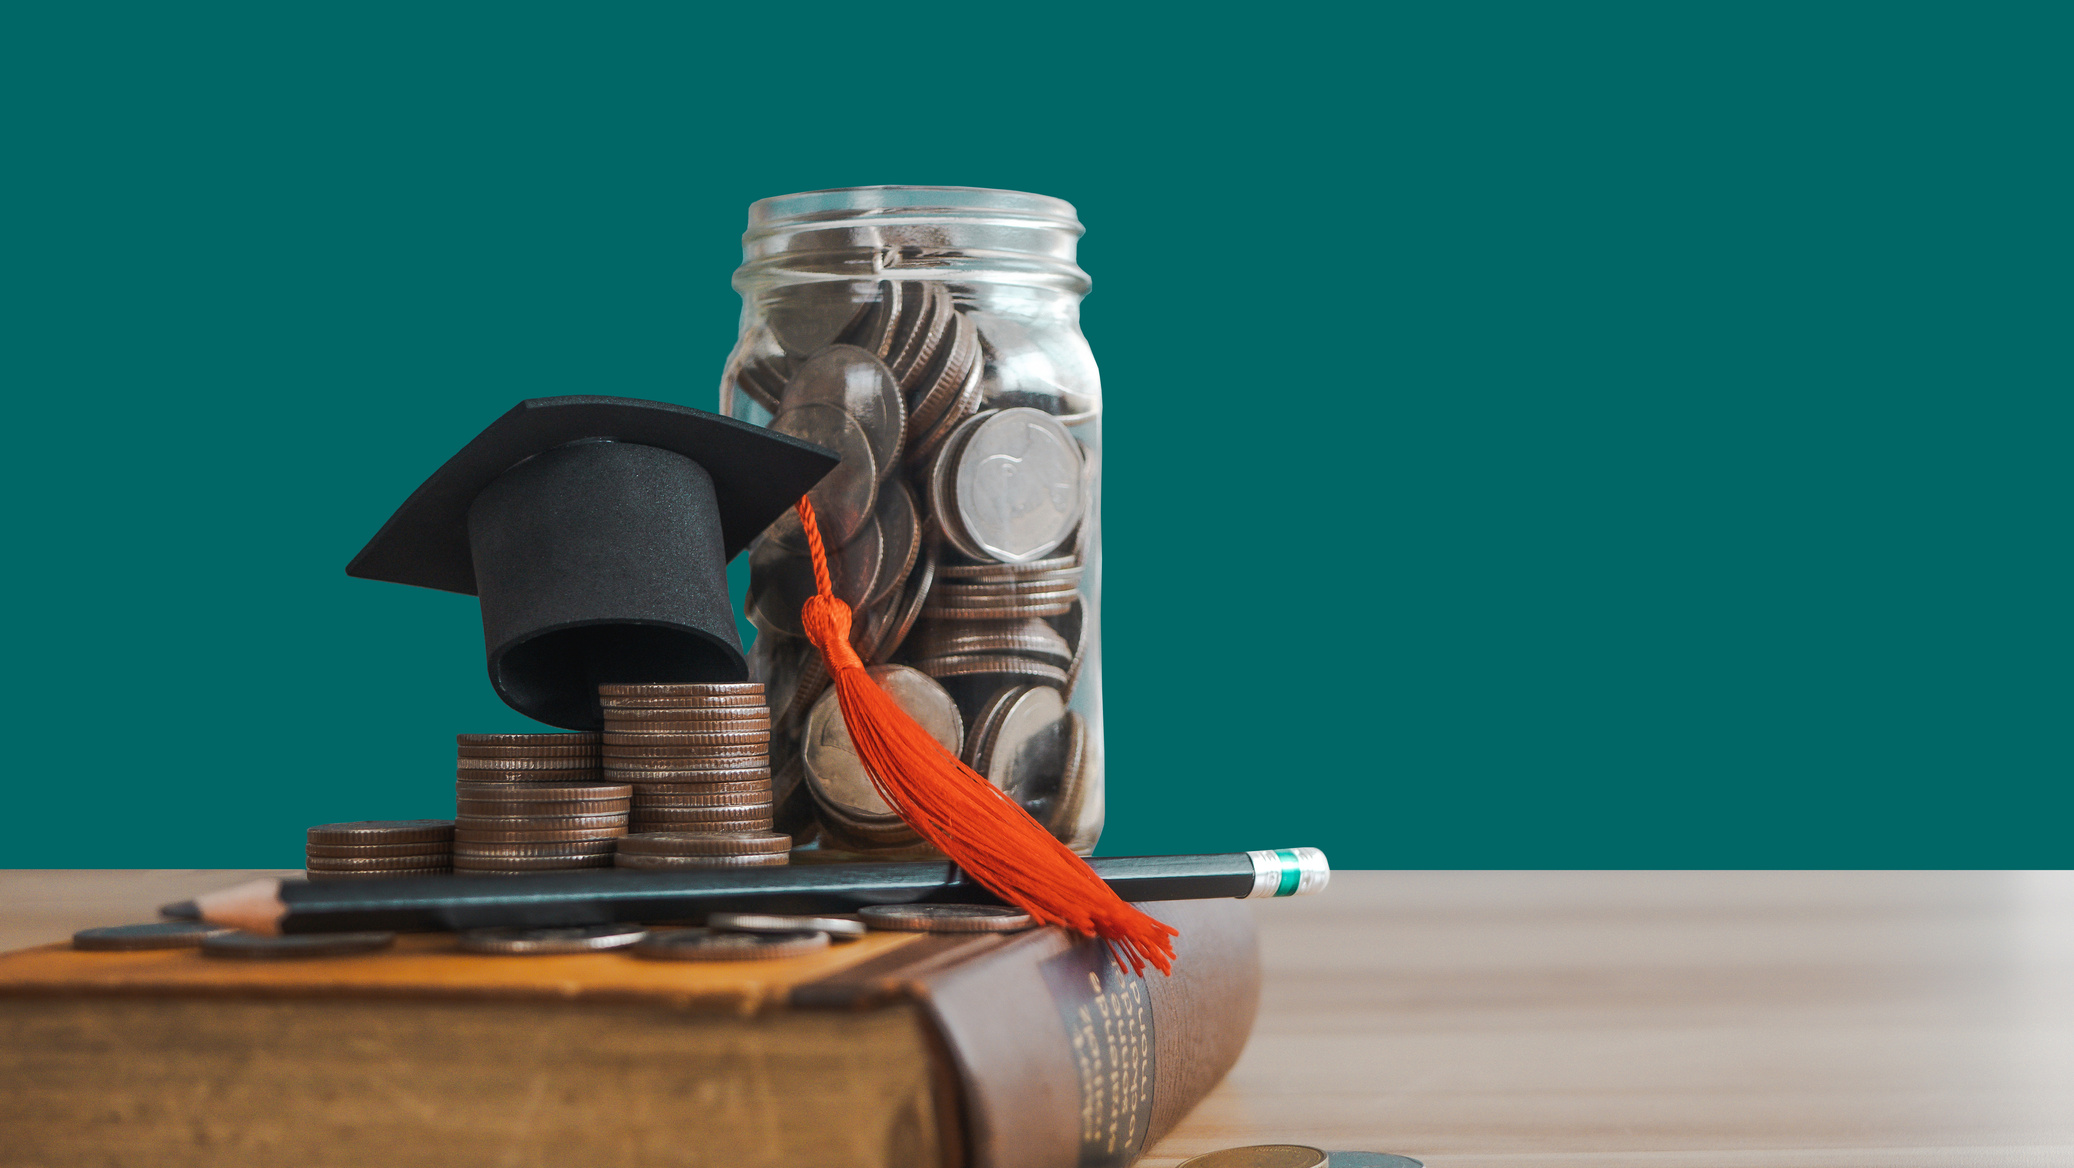 A graduation cap on money coins saving for concept investment education and scholarships. Ideas for College and University Tuition Fees for education. a scholarship that grows through success.